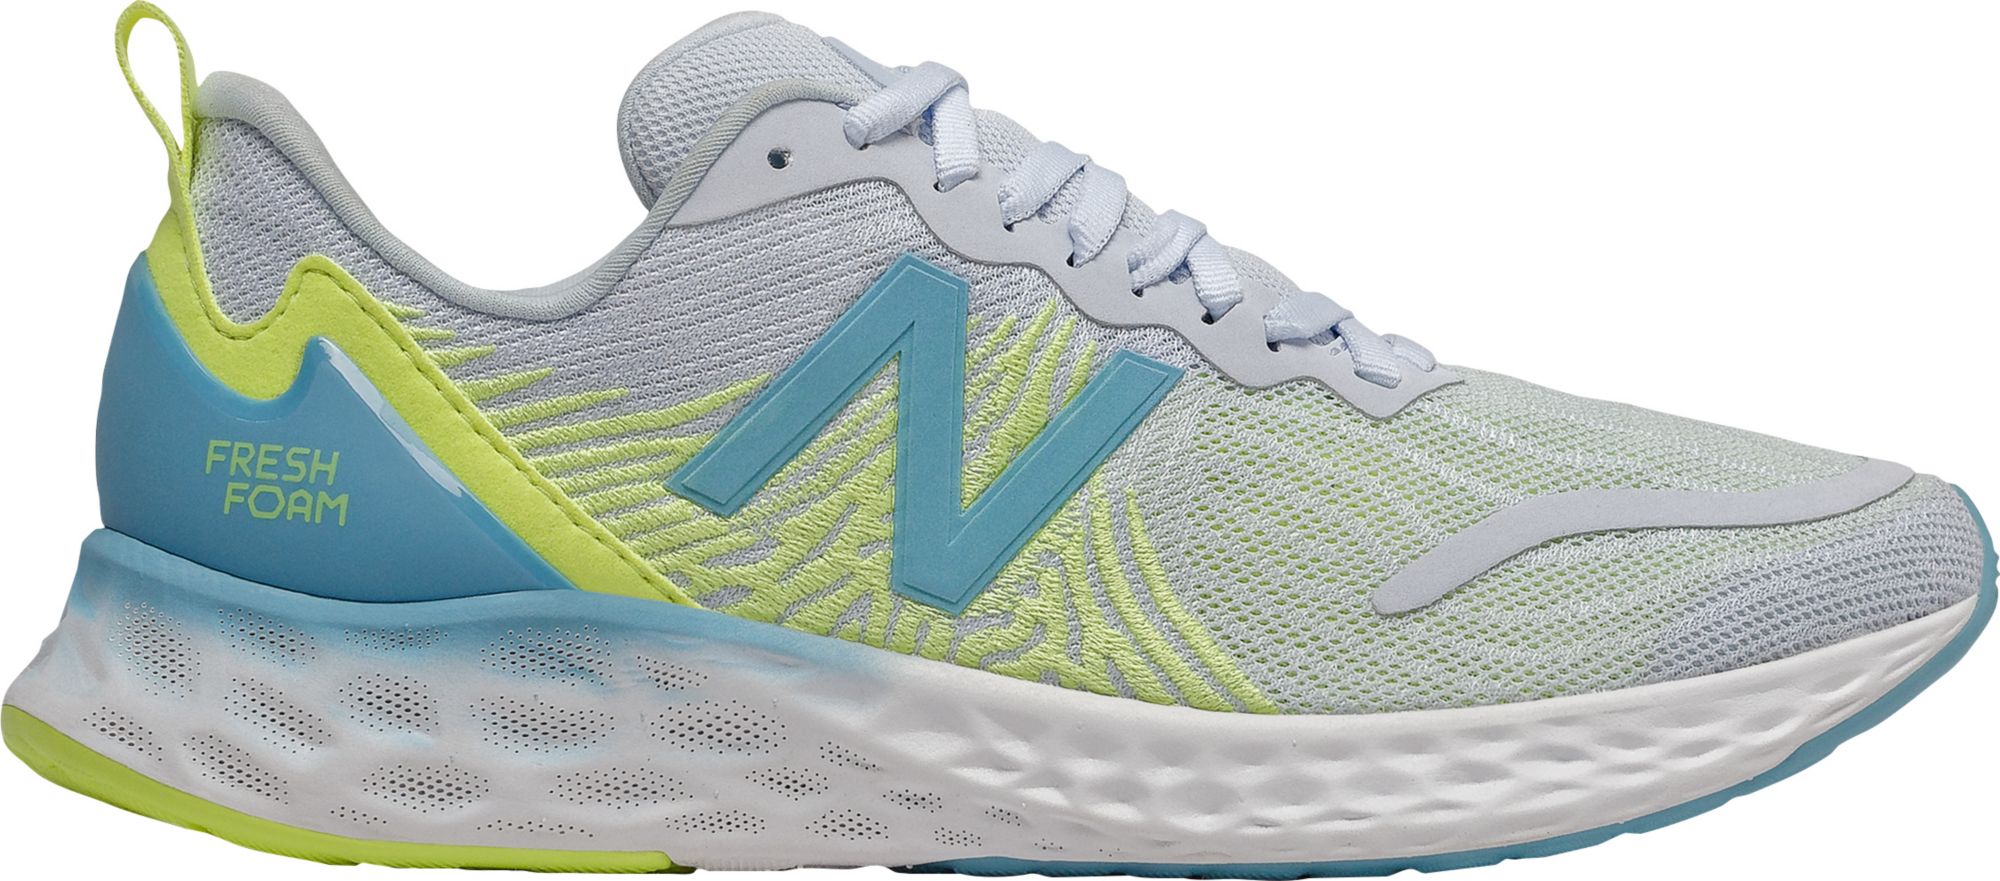 cushioned new balance running shoes